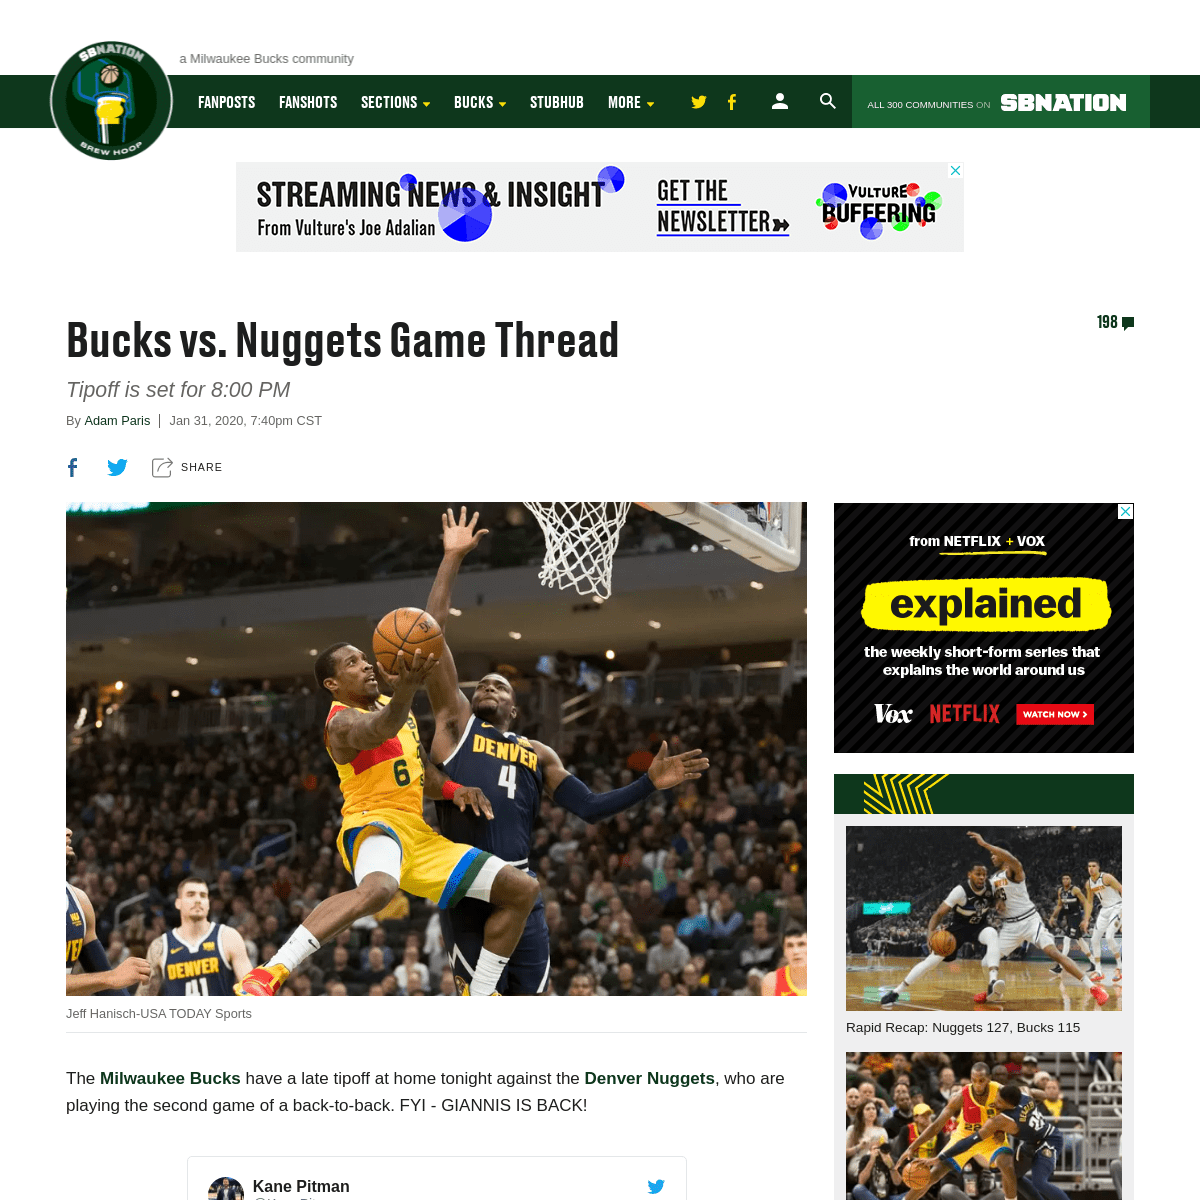 A complete backup of www.brewhoop.com/2020/1/31/21116591/bucks-vs-nuggets-game-thread